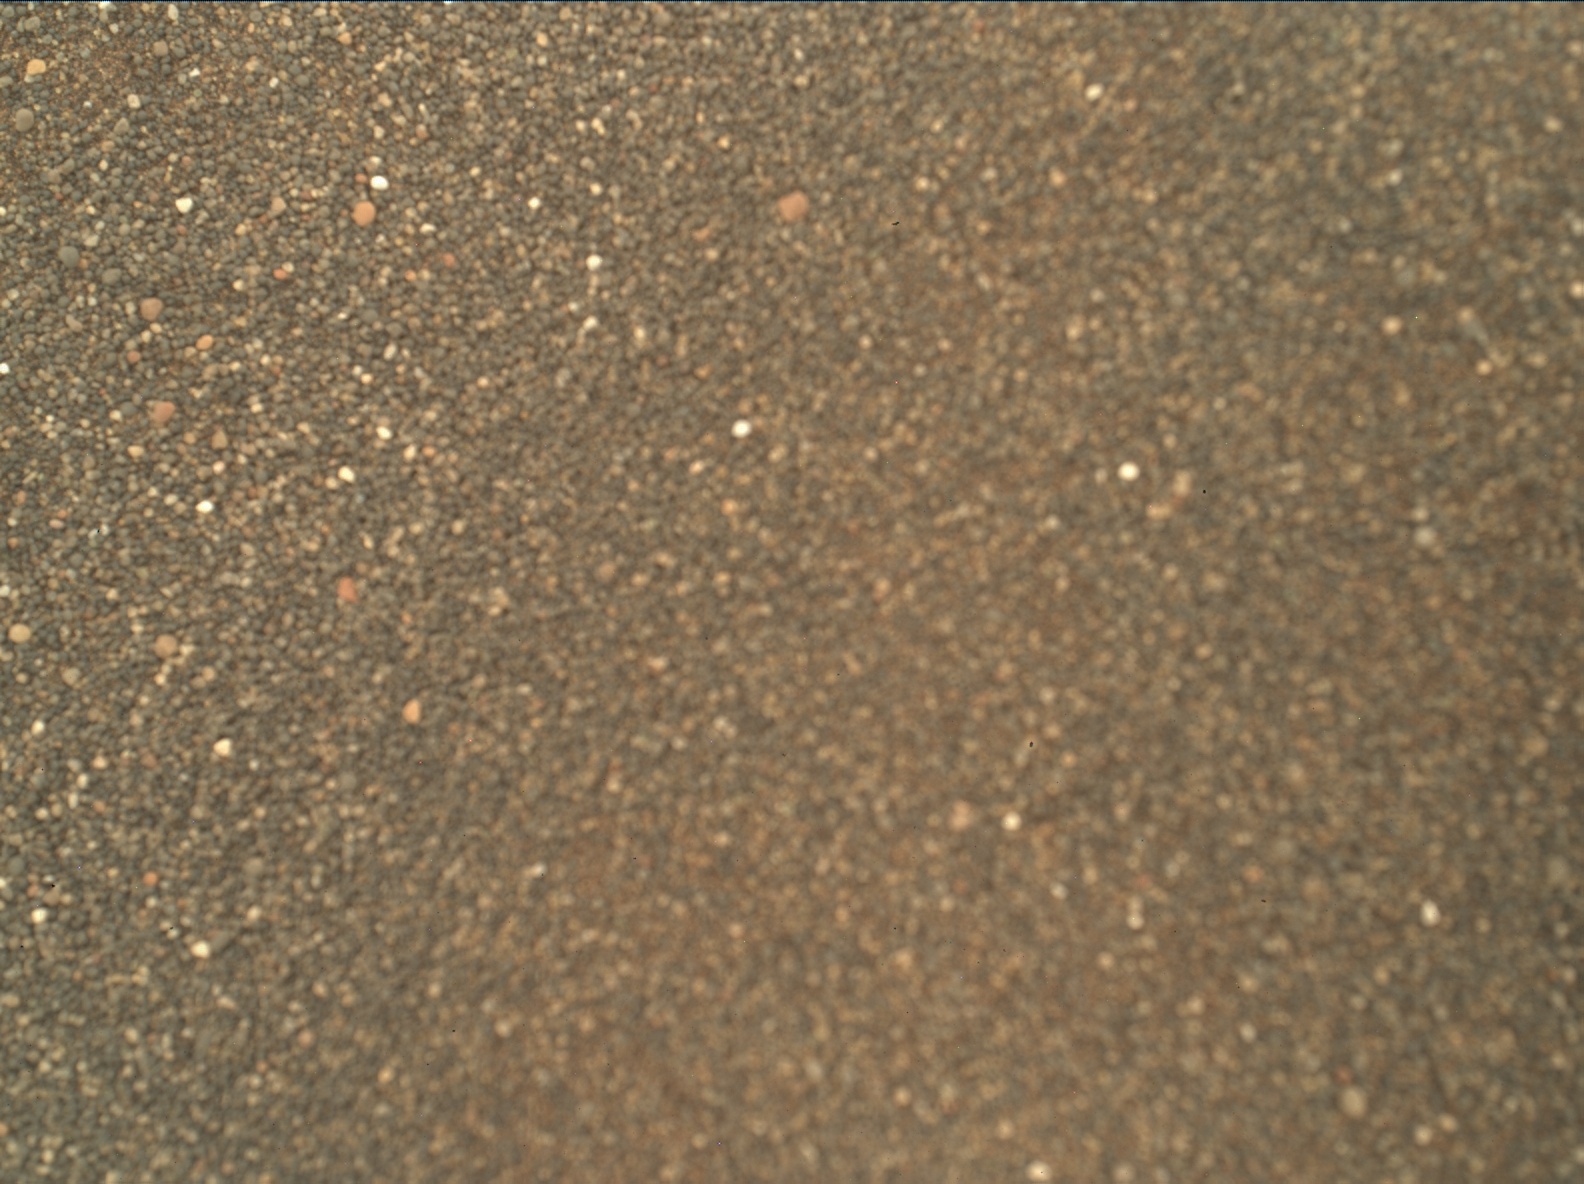 Nasa's Mars rover Curiosity acquired this image using its Mars Hand Lens Imager (MAHLI) on Sol 1793